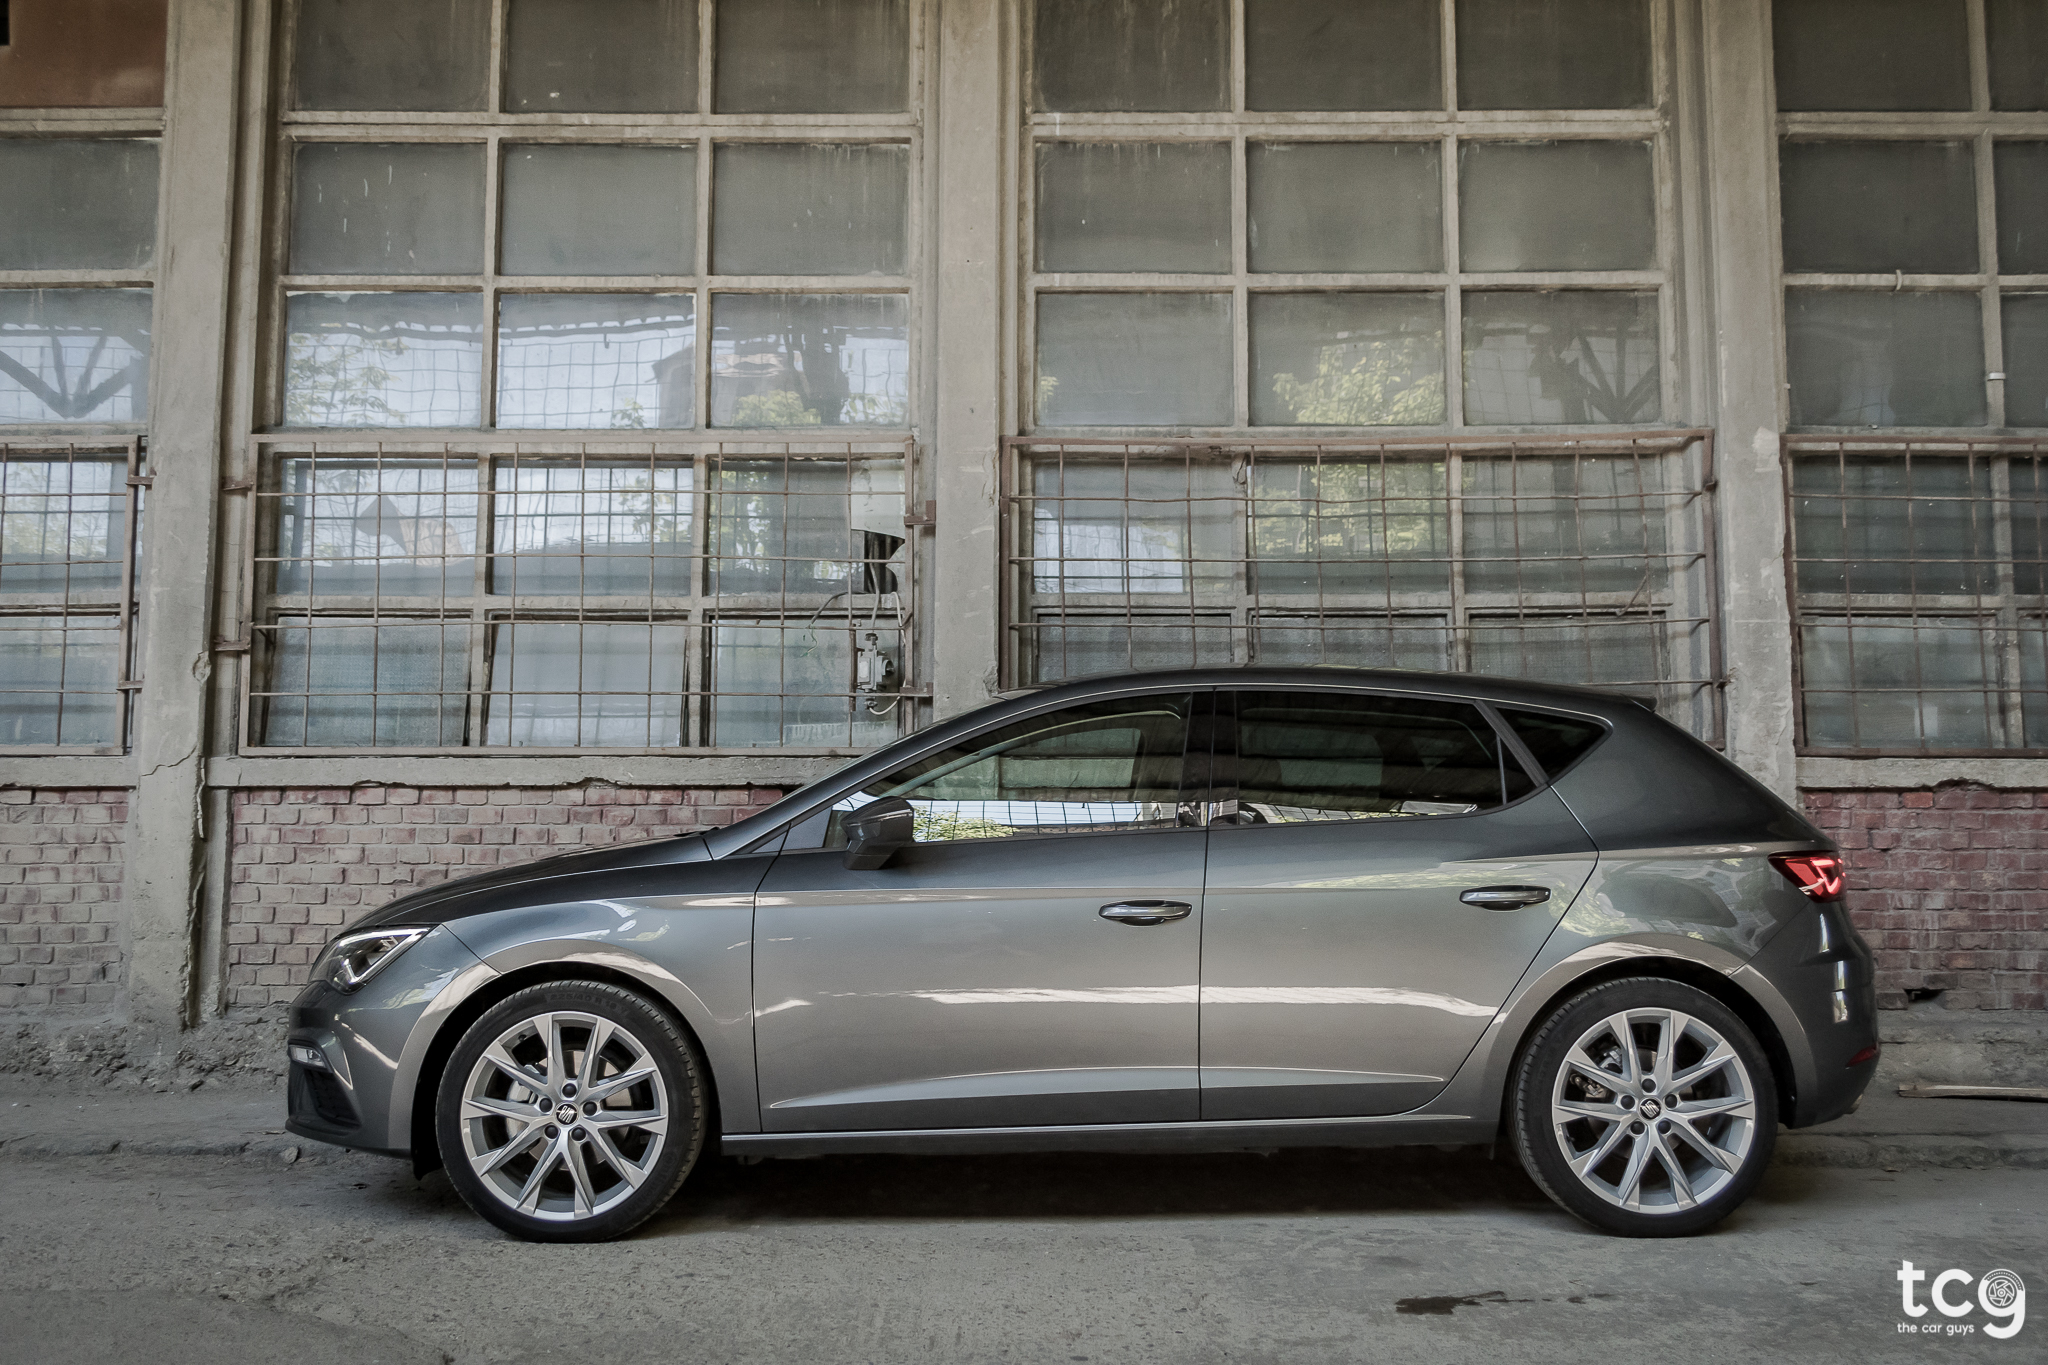 Brutally Honest SEAT LEON MK3 Buyers Guide & Review 